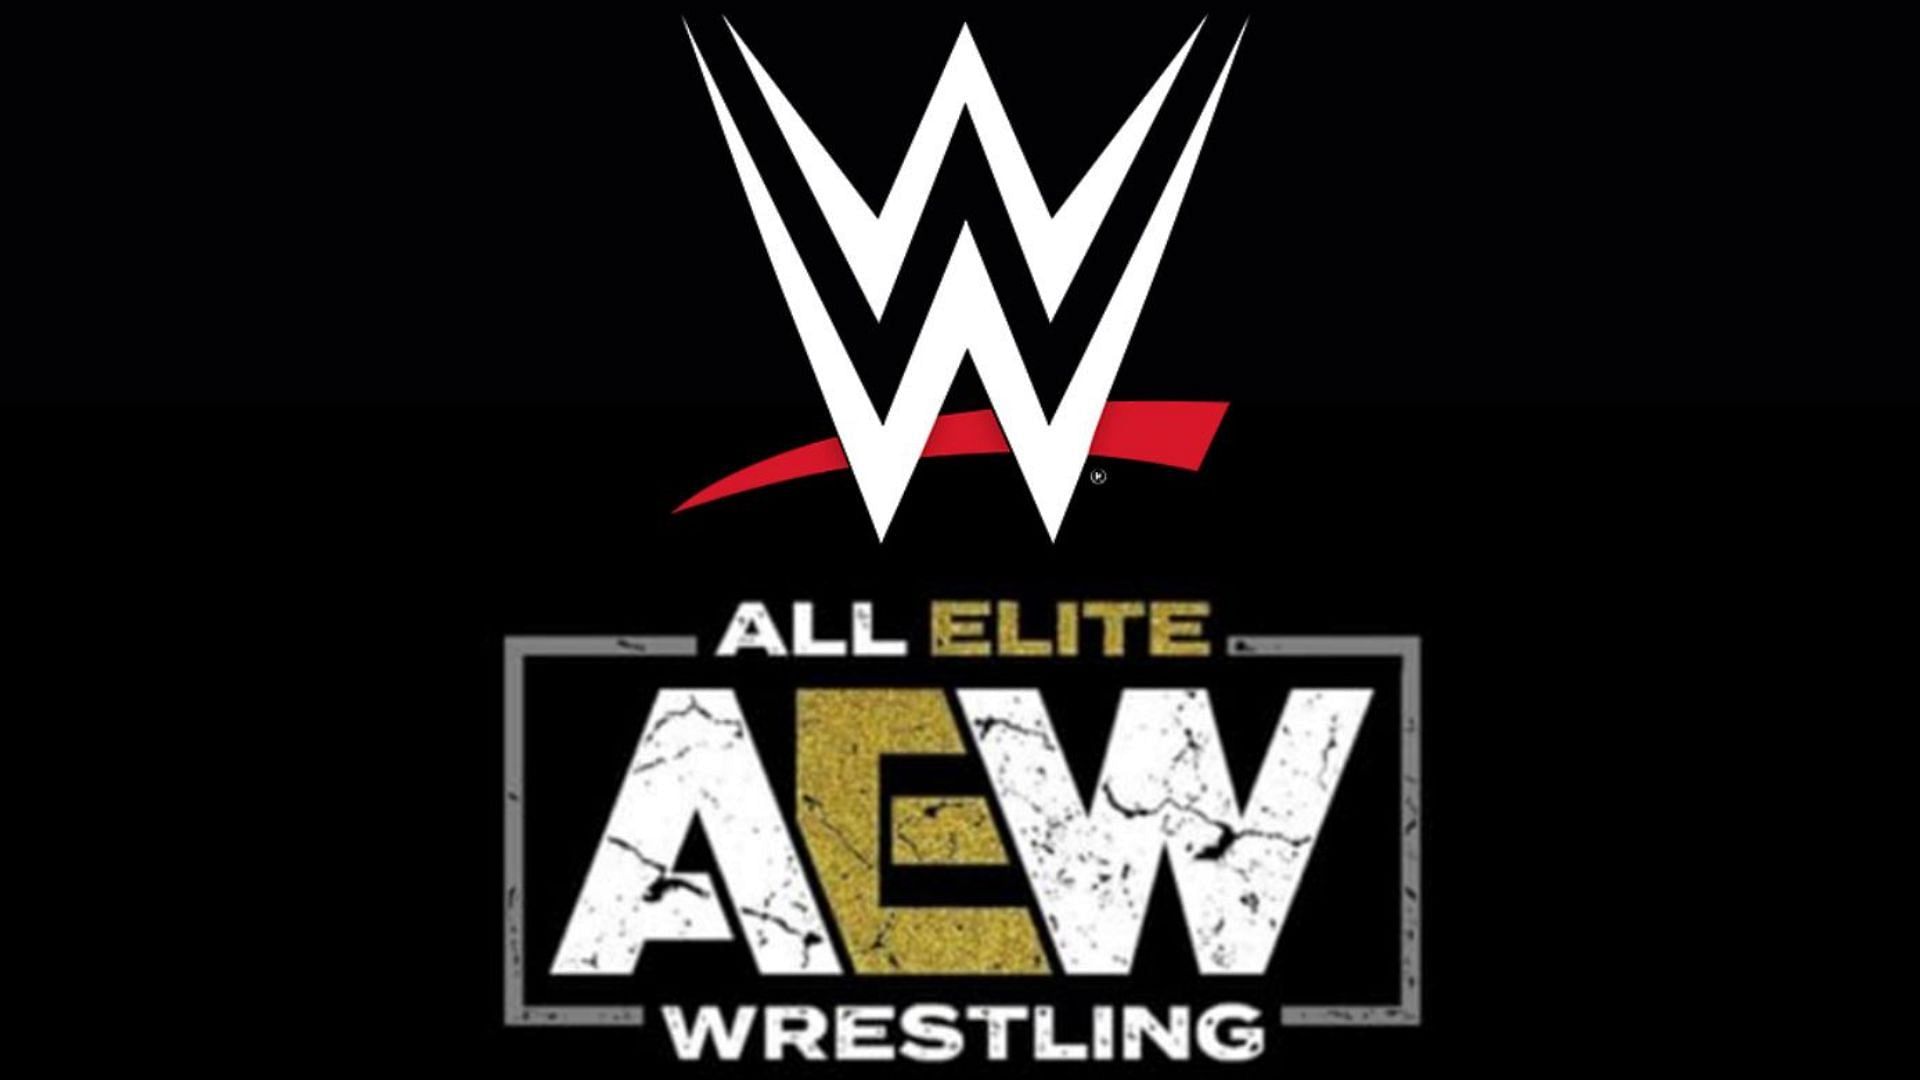 Find out which former WWE Superstar had signed with AEW?